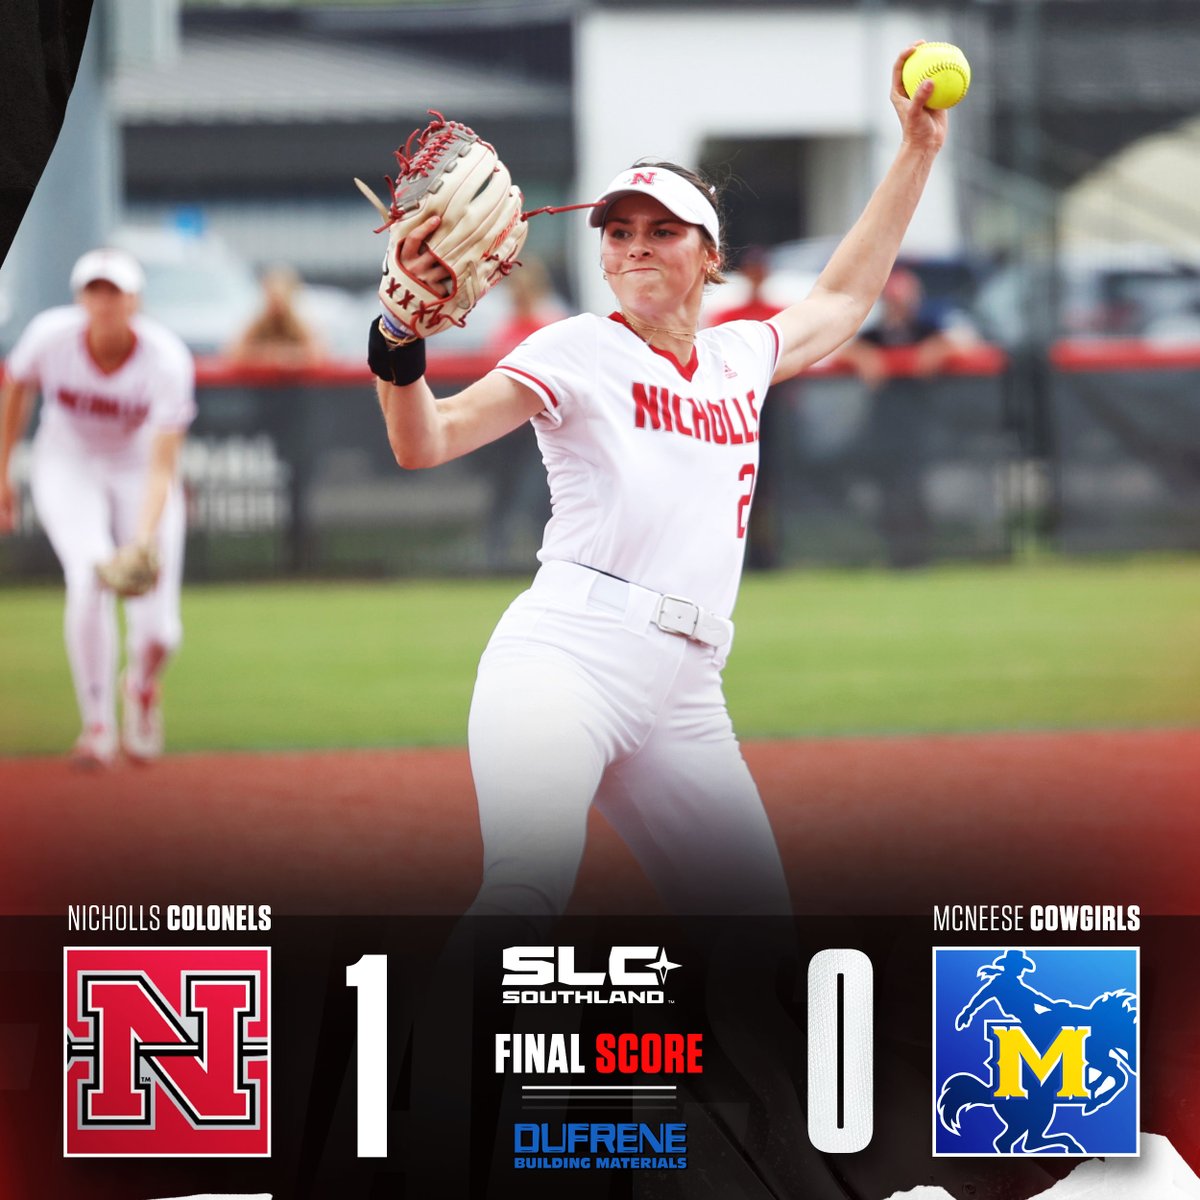 COLONELS WIN!!! Molly Yoo tosses a 2-hit shutout in a thrilling win over McNeese #geauxcolonels #SwordsUp